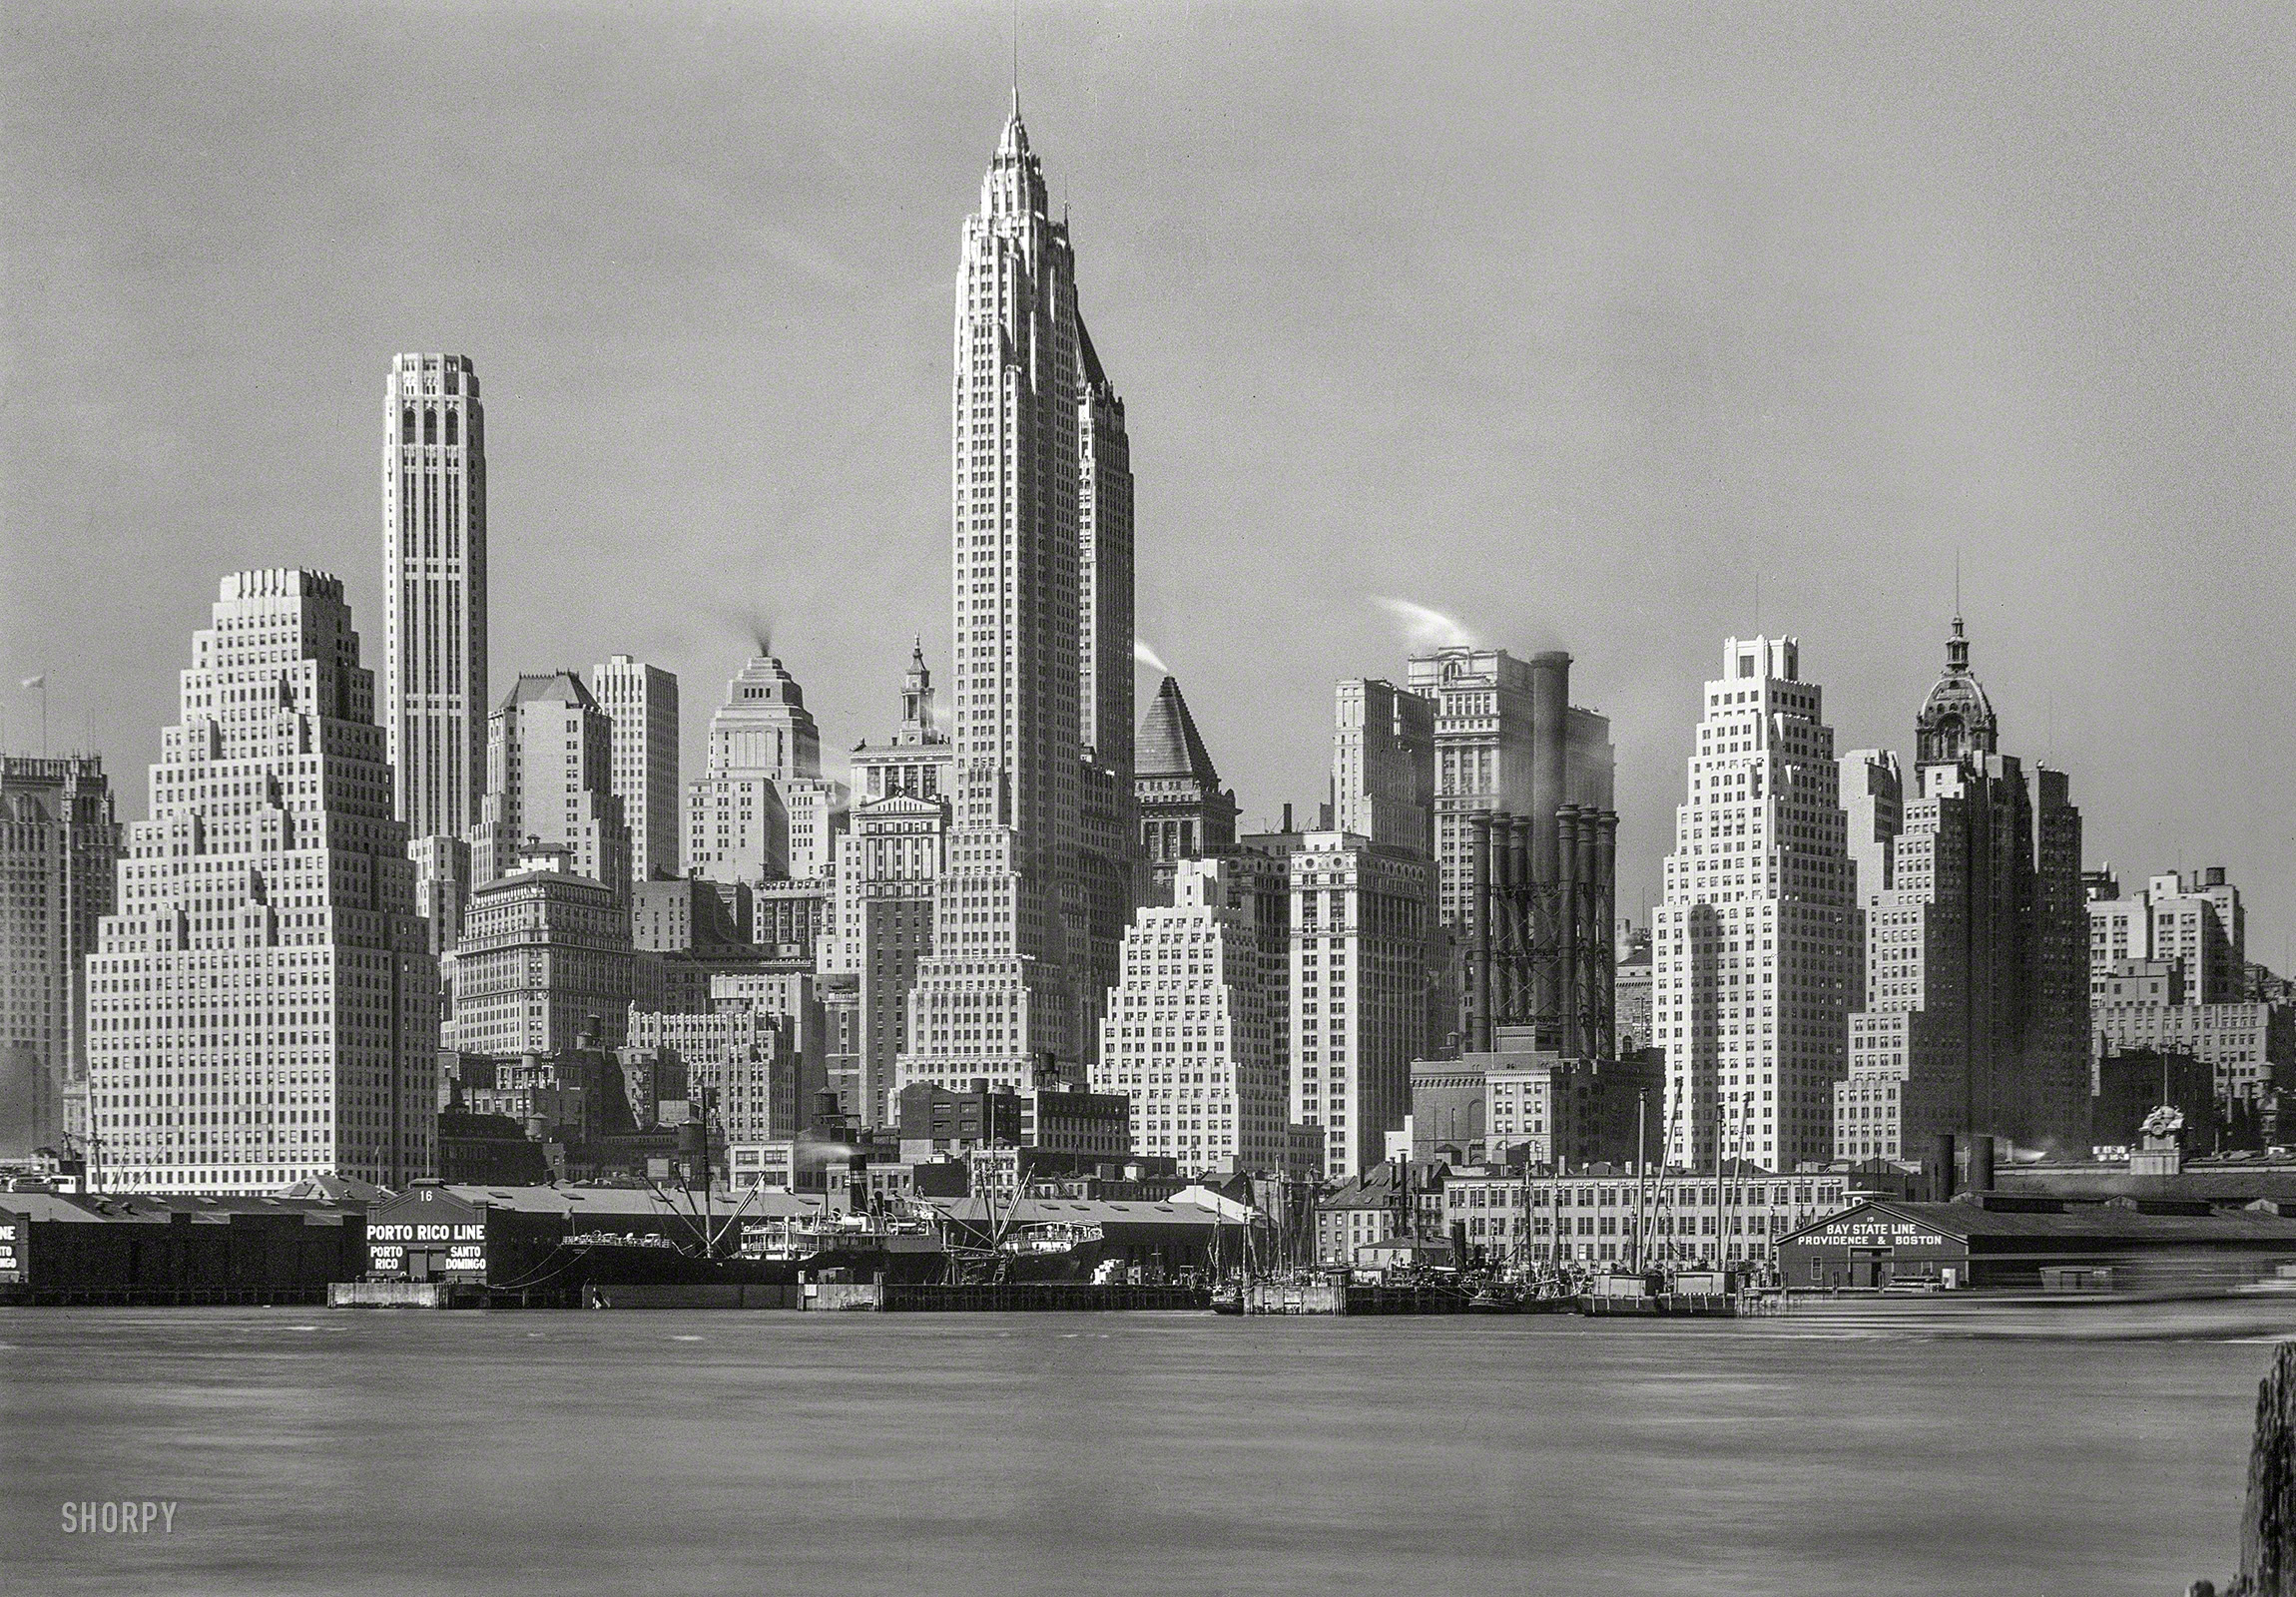 April 4, 1932. "New York city views. Lower Manhattan from foot of Brooklyn Bridge." Large-format acetate negative by Gottscho-Schleisner. View full size.